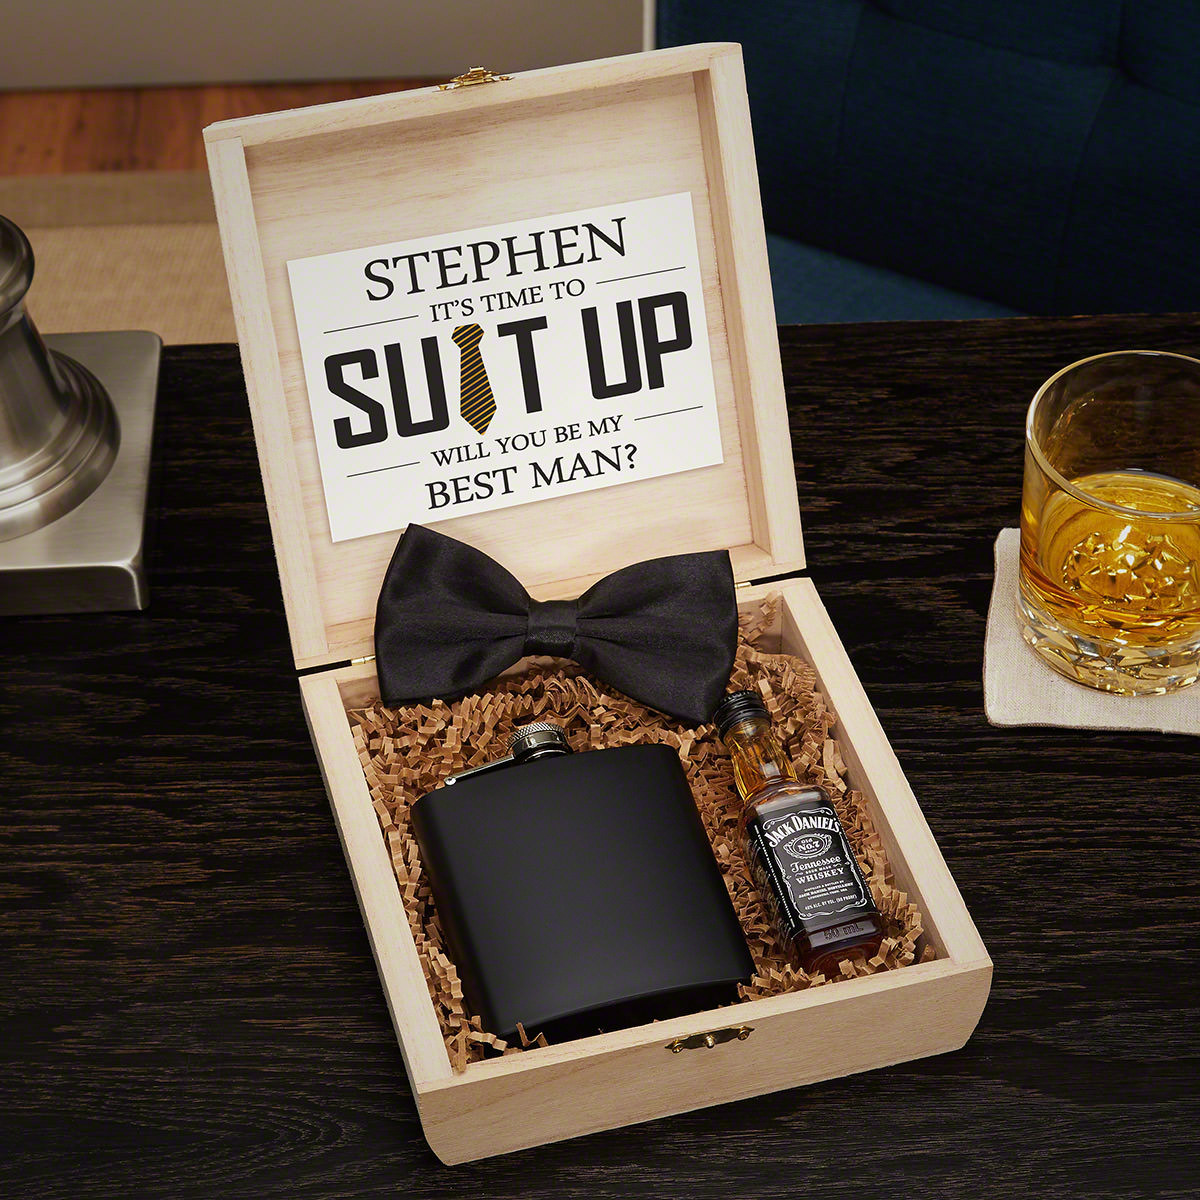 Best Man And Groomsmen Gift Ideas
 Personalized Groomsmen Gifts and Wooden Crate Set